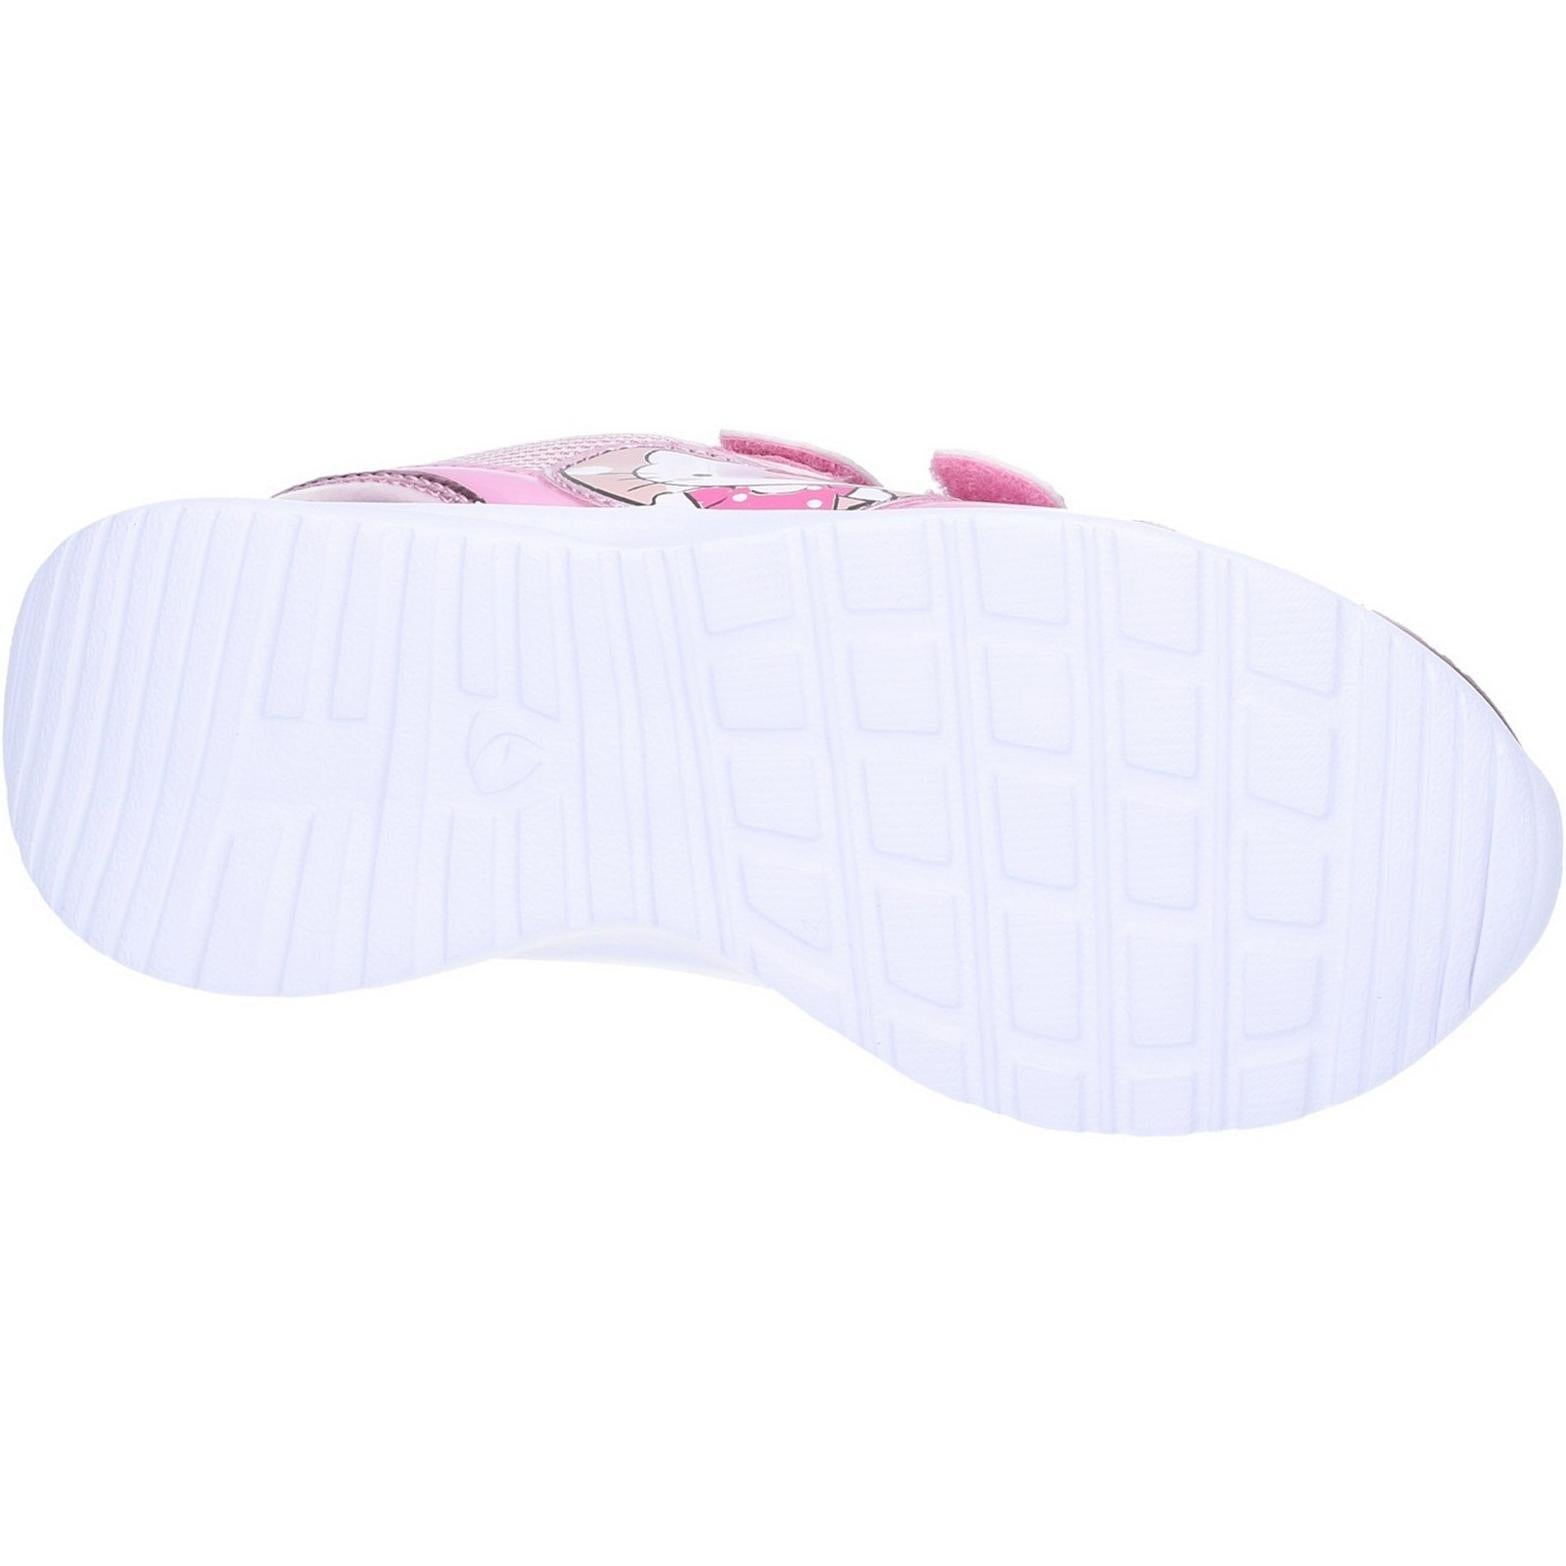 Leomil Hello Kitty Touch Fastening Trainer